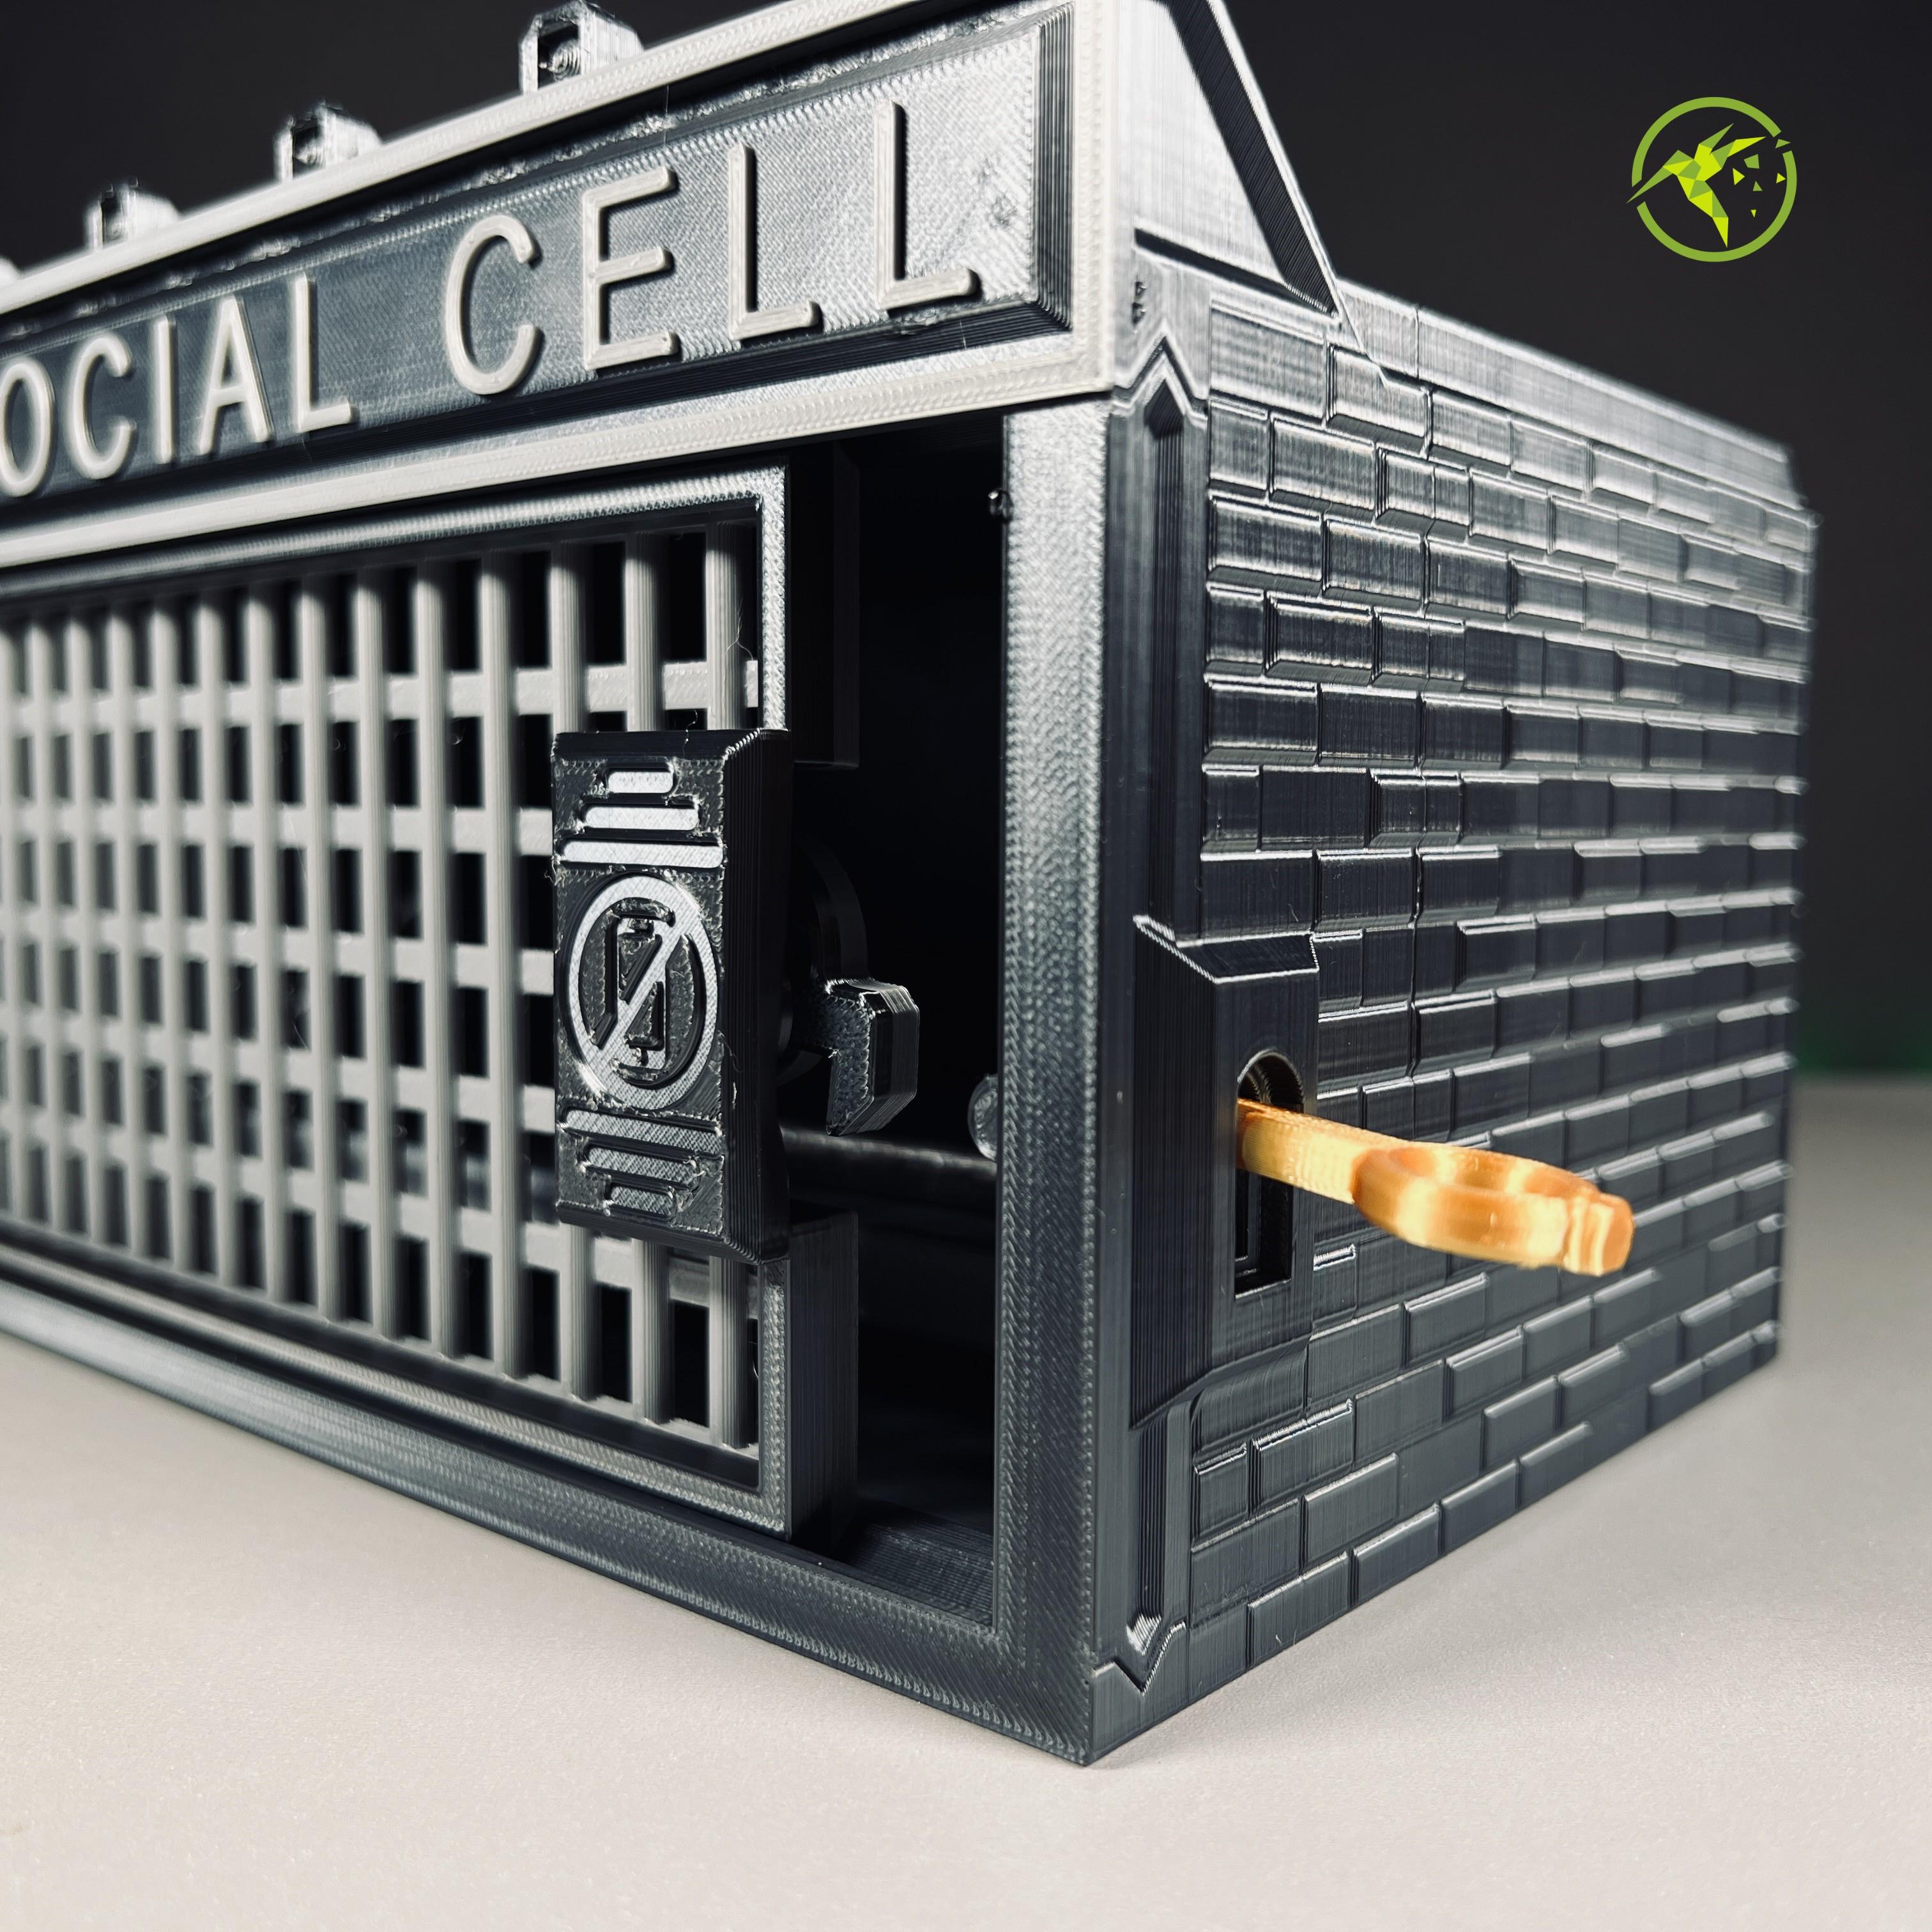 The Social Cell - Smartphone Jail Cell, Phone Storage 3d model